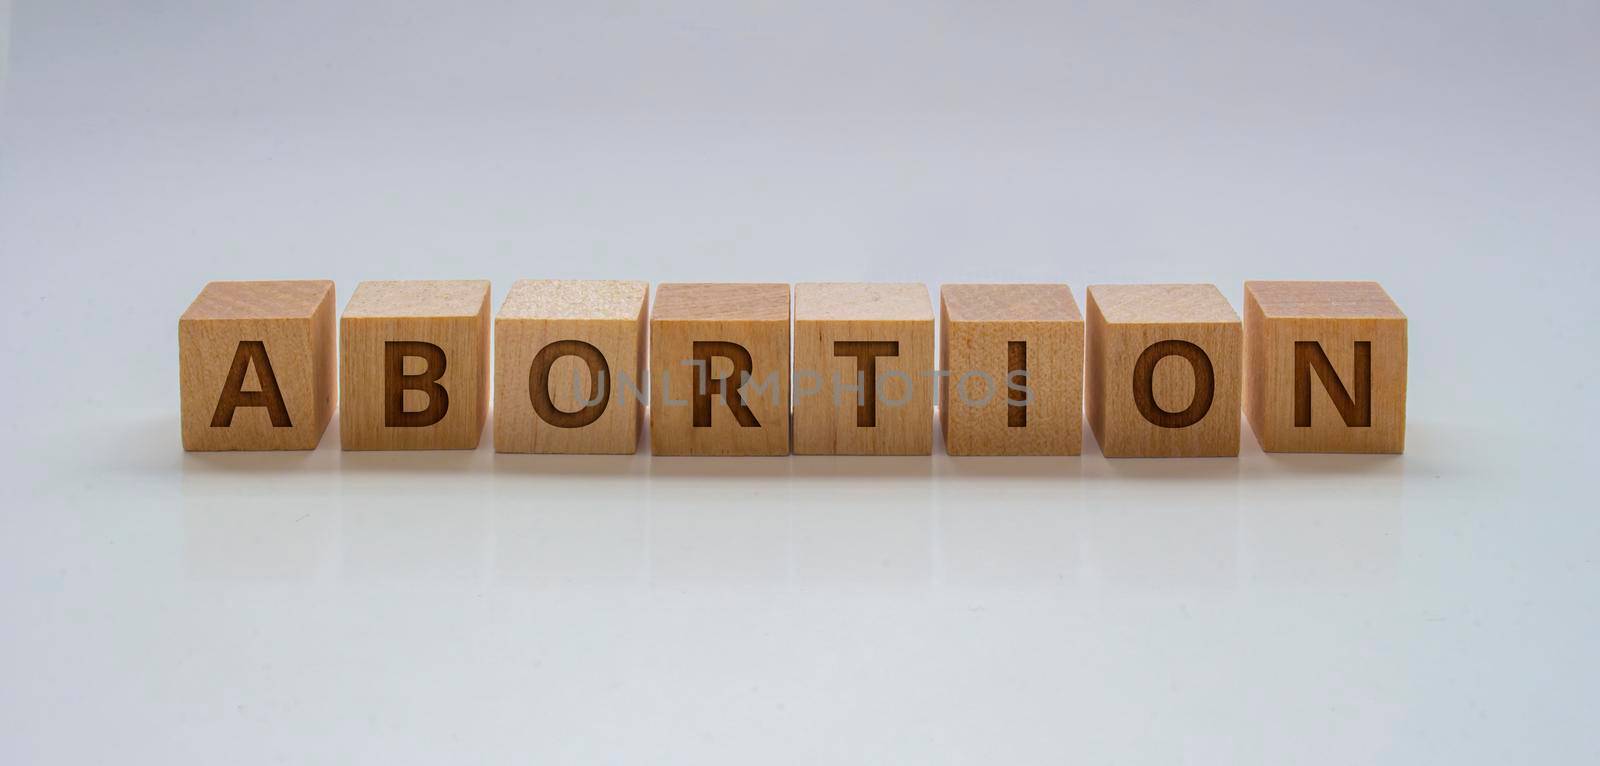 A Banner with wooden blocks with the text: "Abortion" on a clear background by oasisamuel